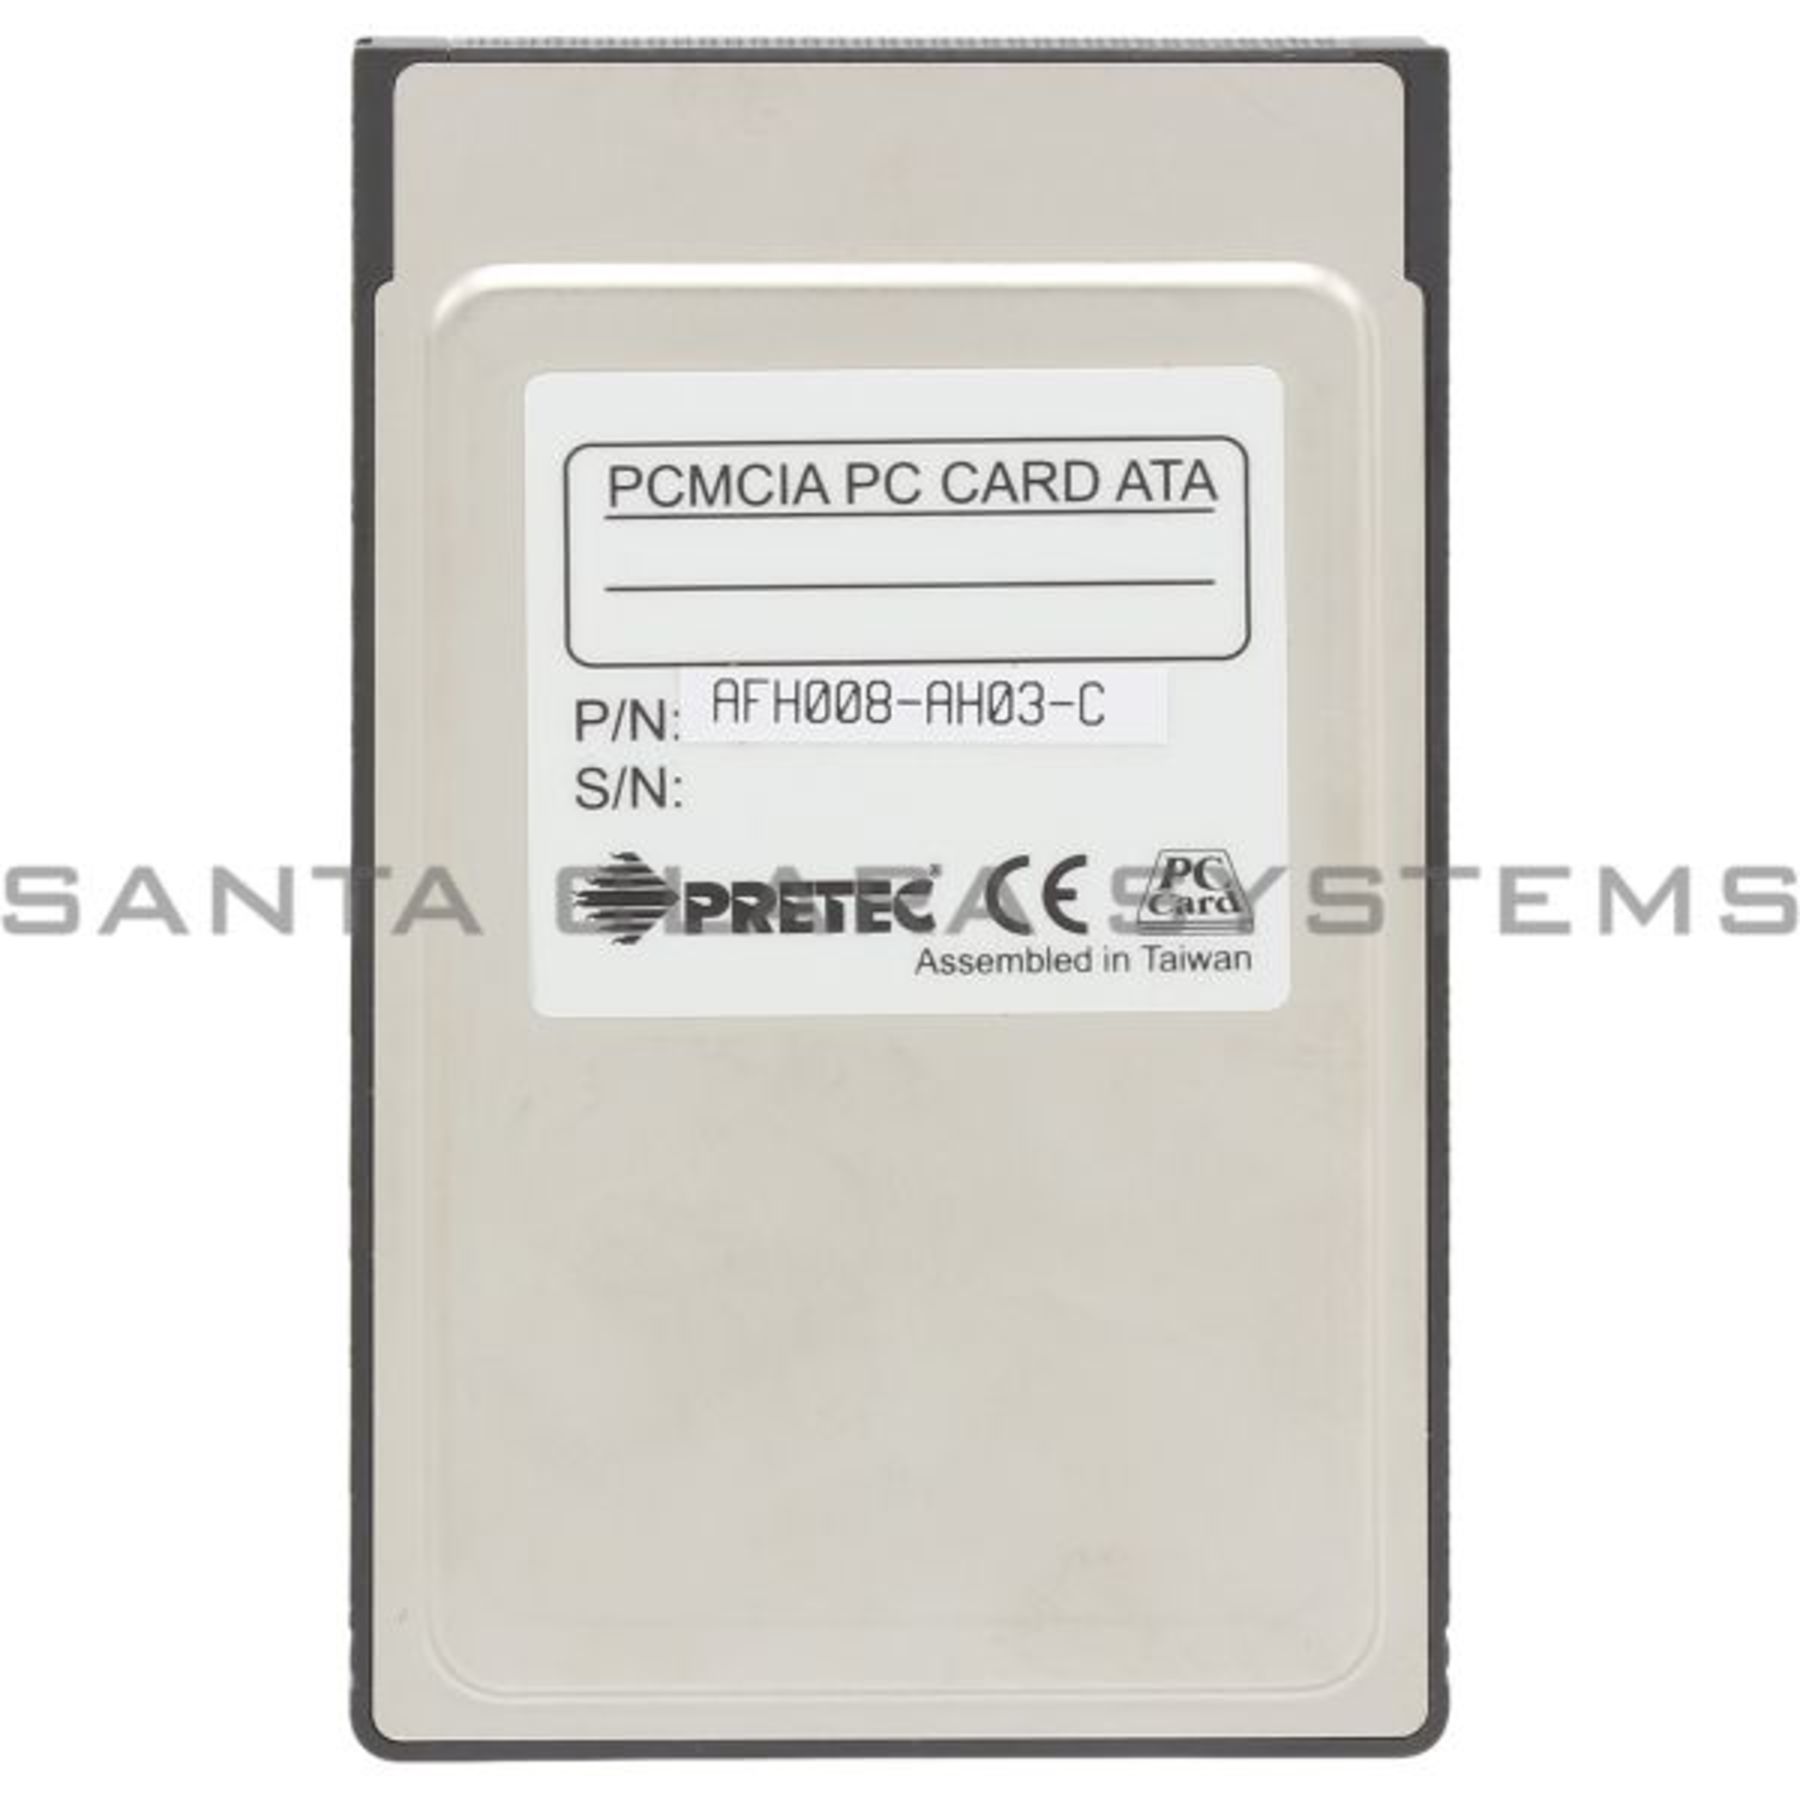 Telemecanique XBT MEM 08 8MB PCMCIA Memory Card with 12 month warranty 